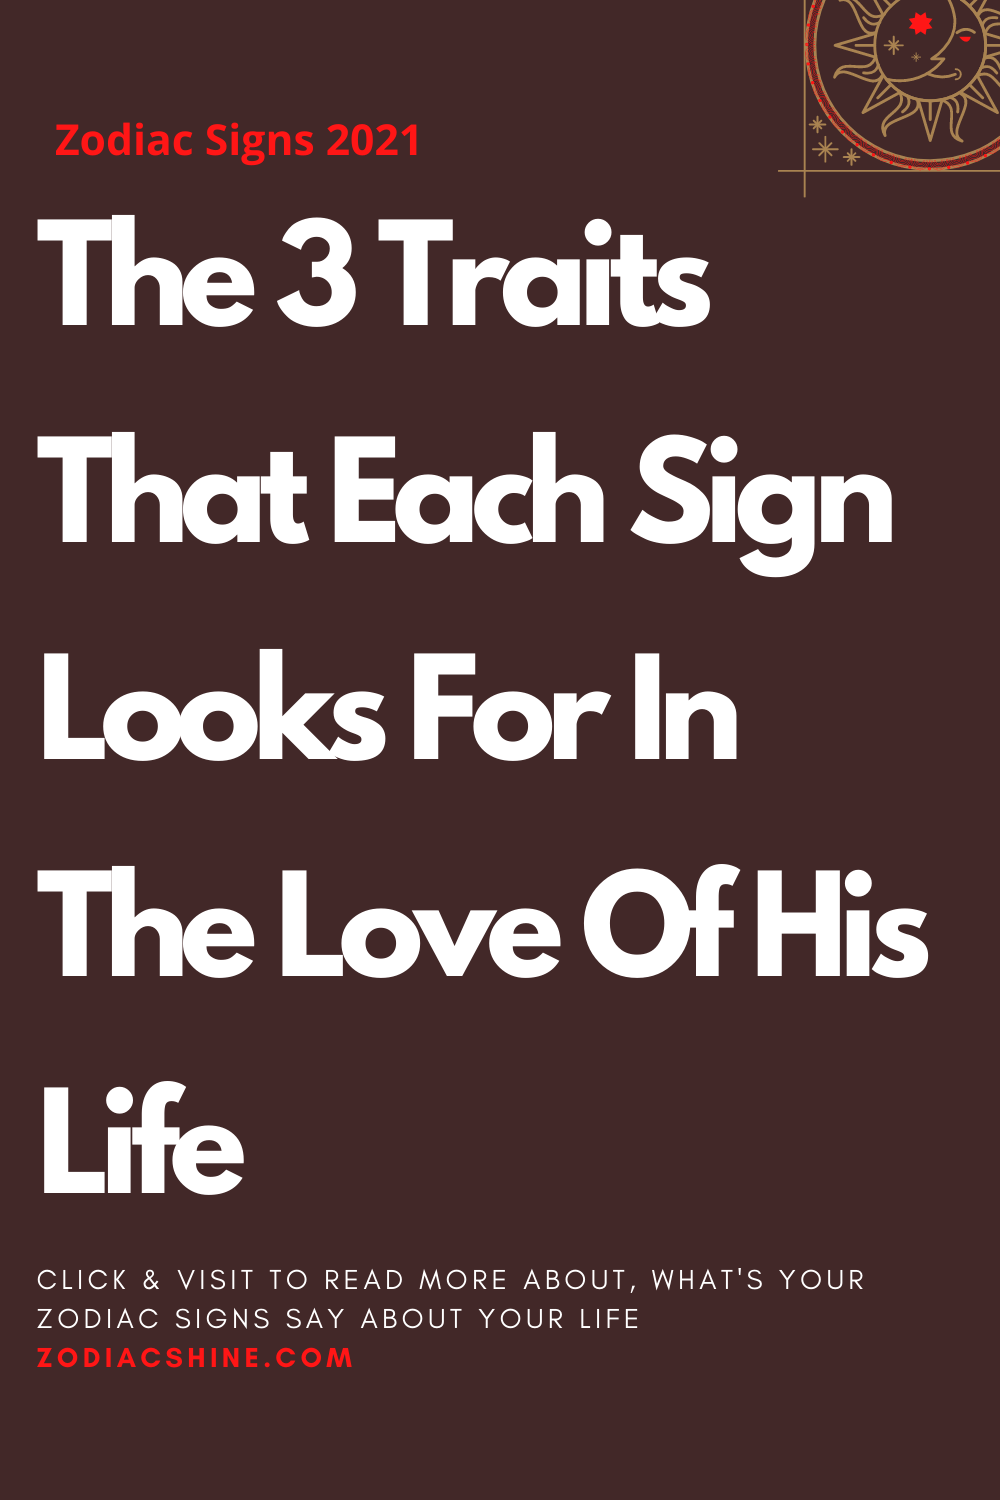 The 3 Traits That Each Sign Looks For In The Love Of His Life